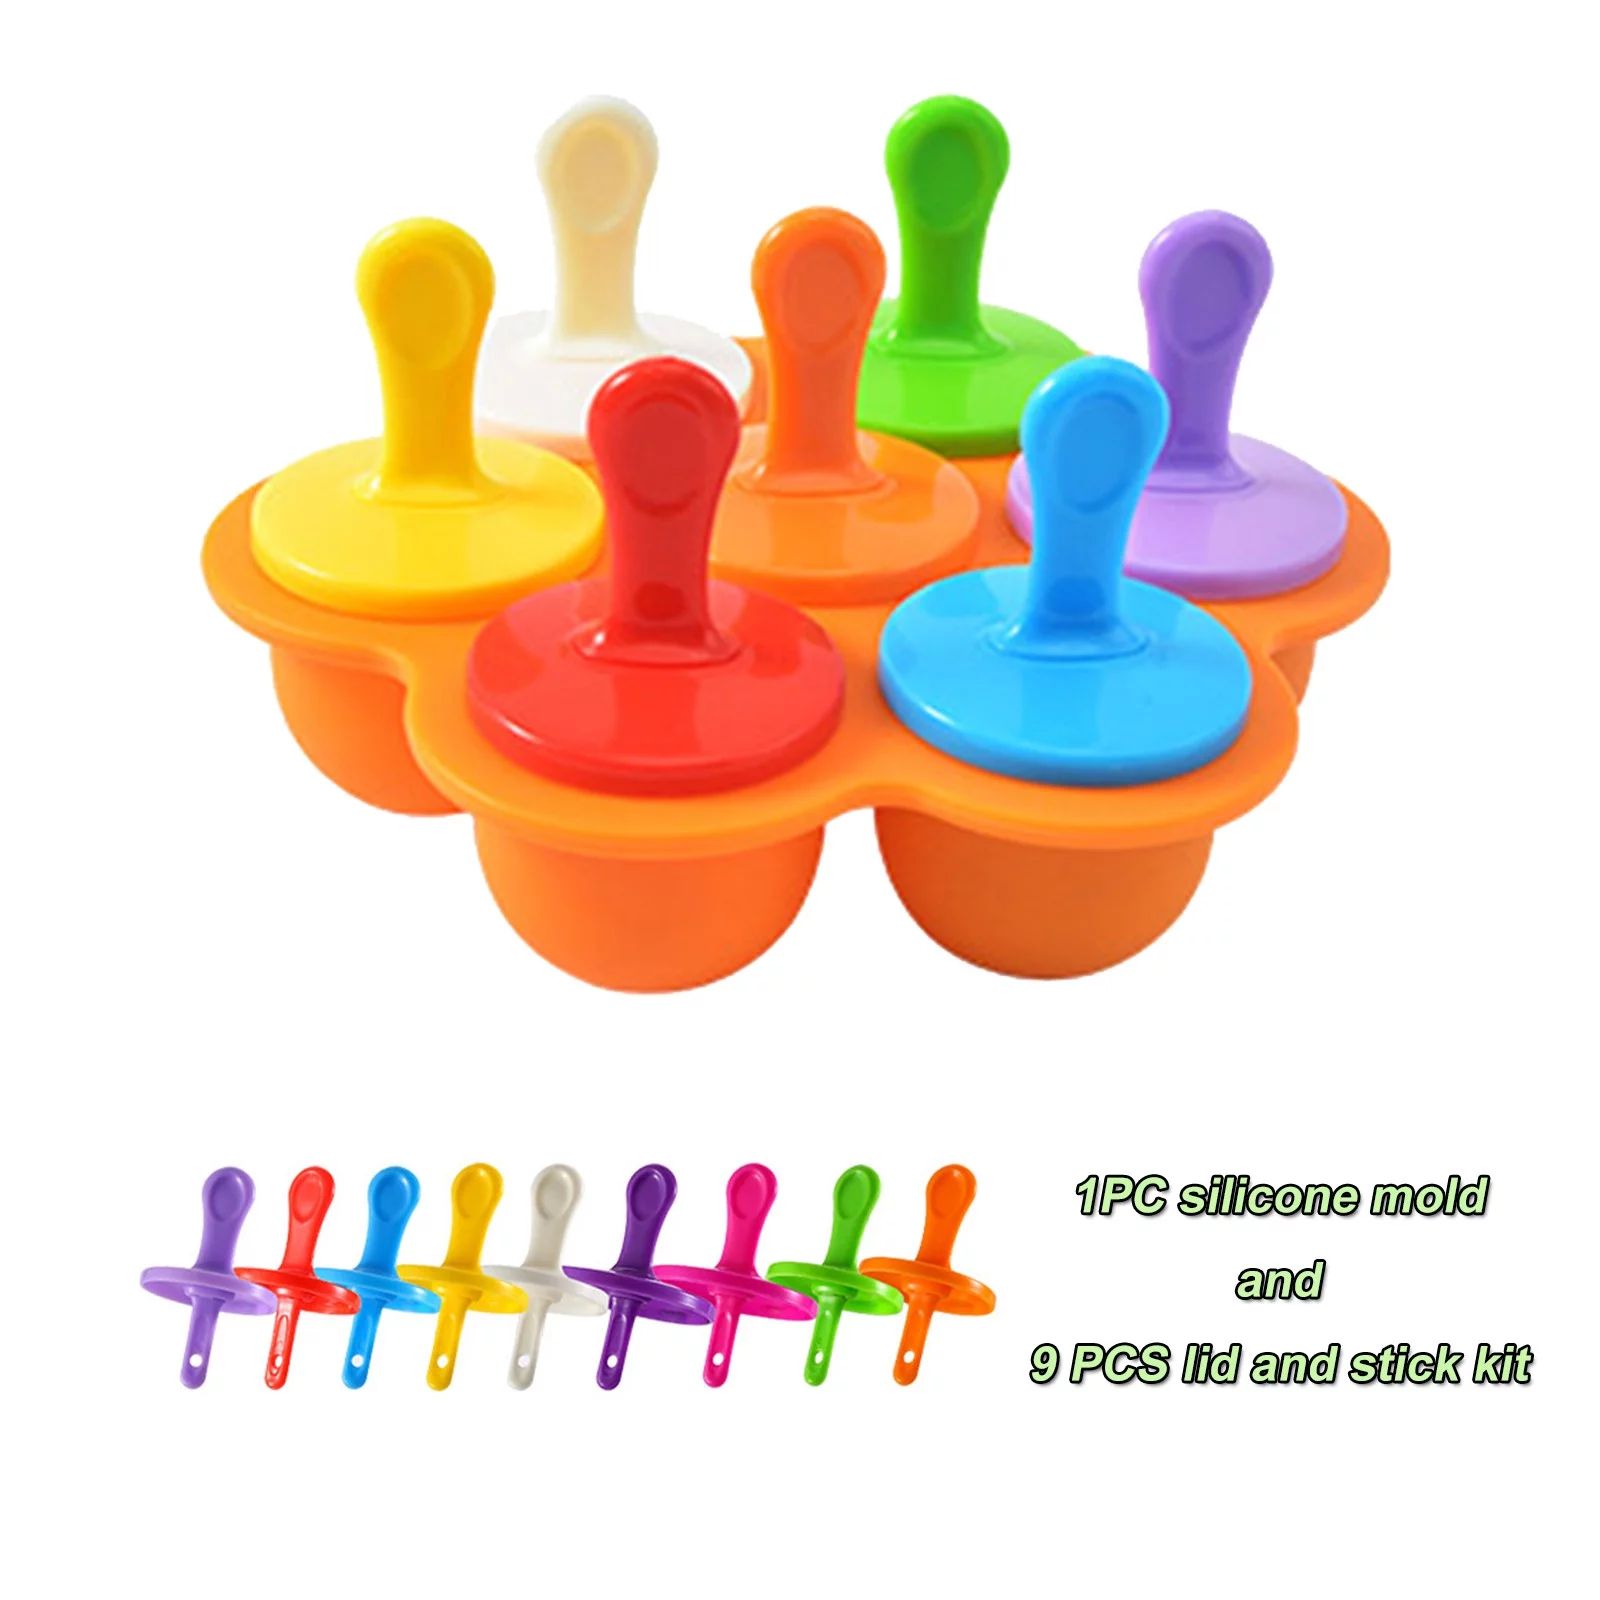 Pompotops 7 Holes Silicone Popsicle Molds With 9PCS Sticks Non-Stick DIY Ice Popsicle Mold | Walmart (US)